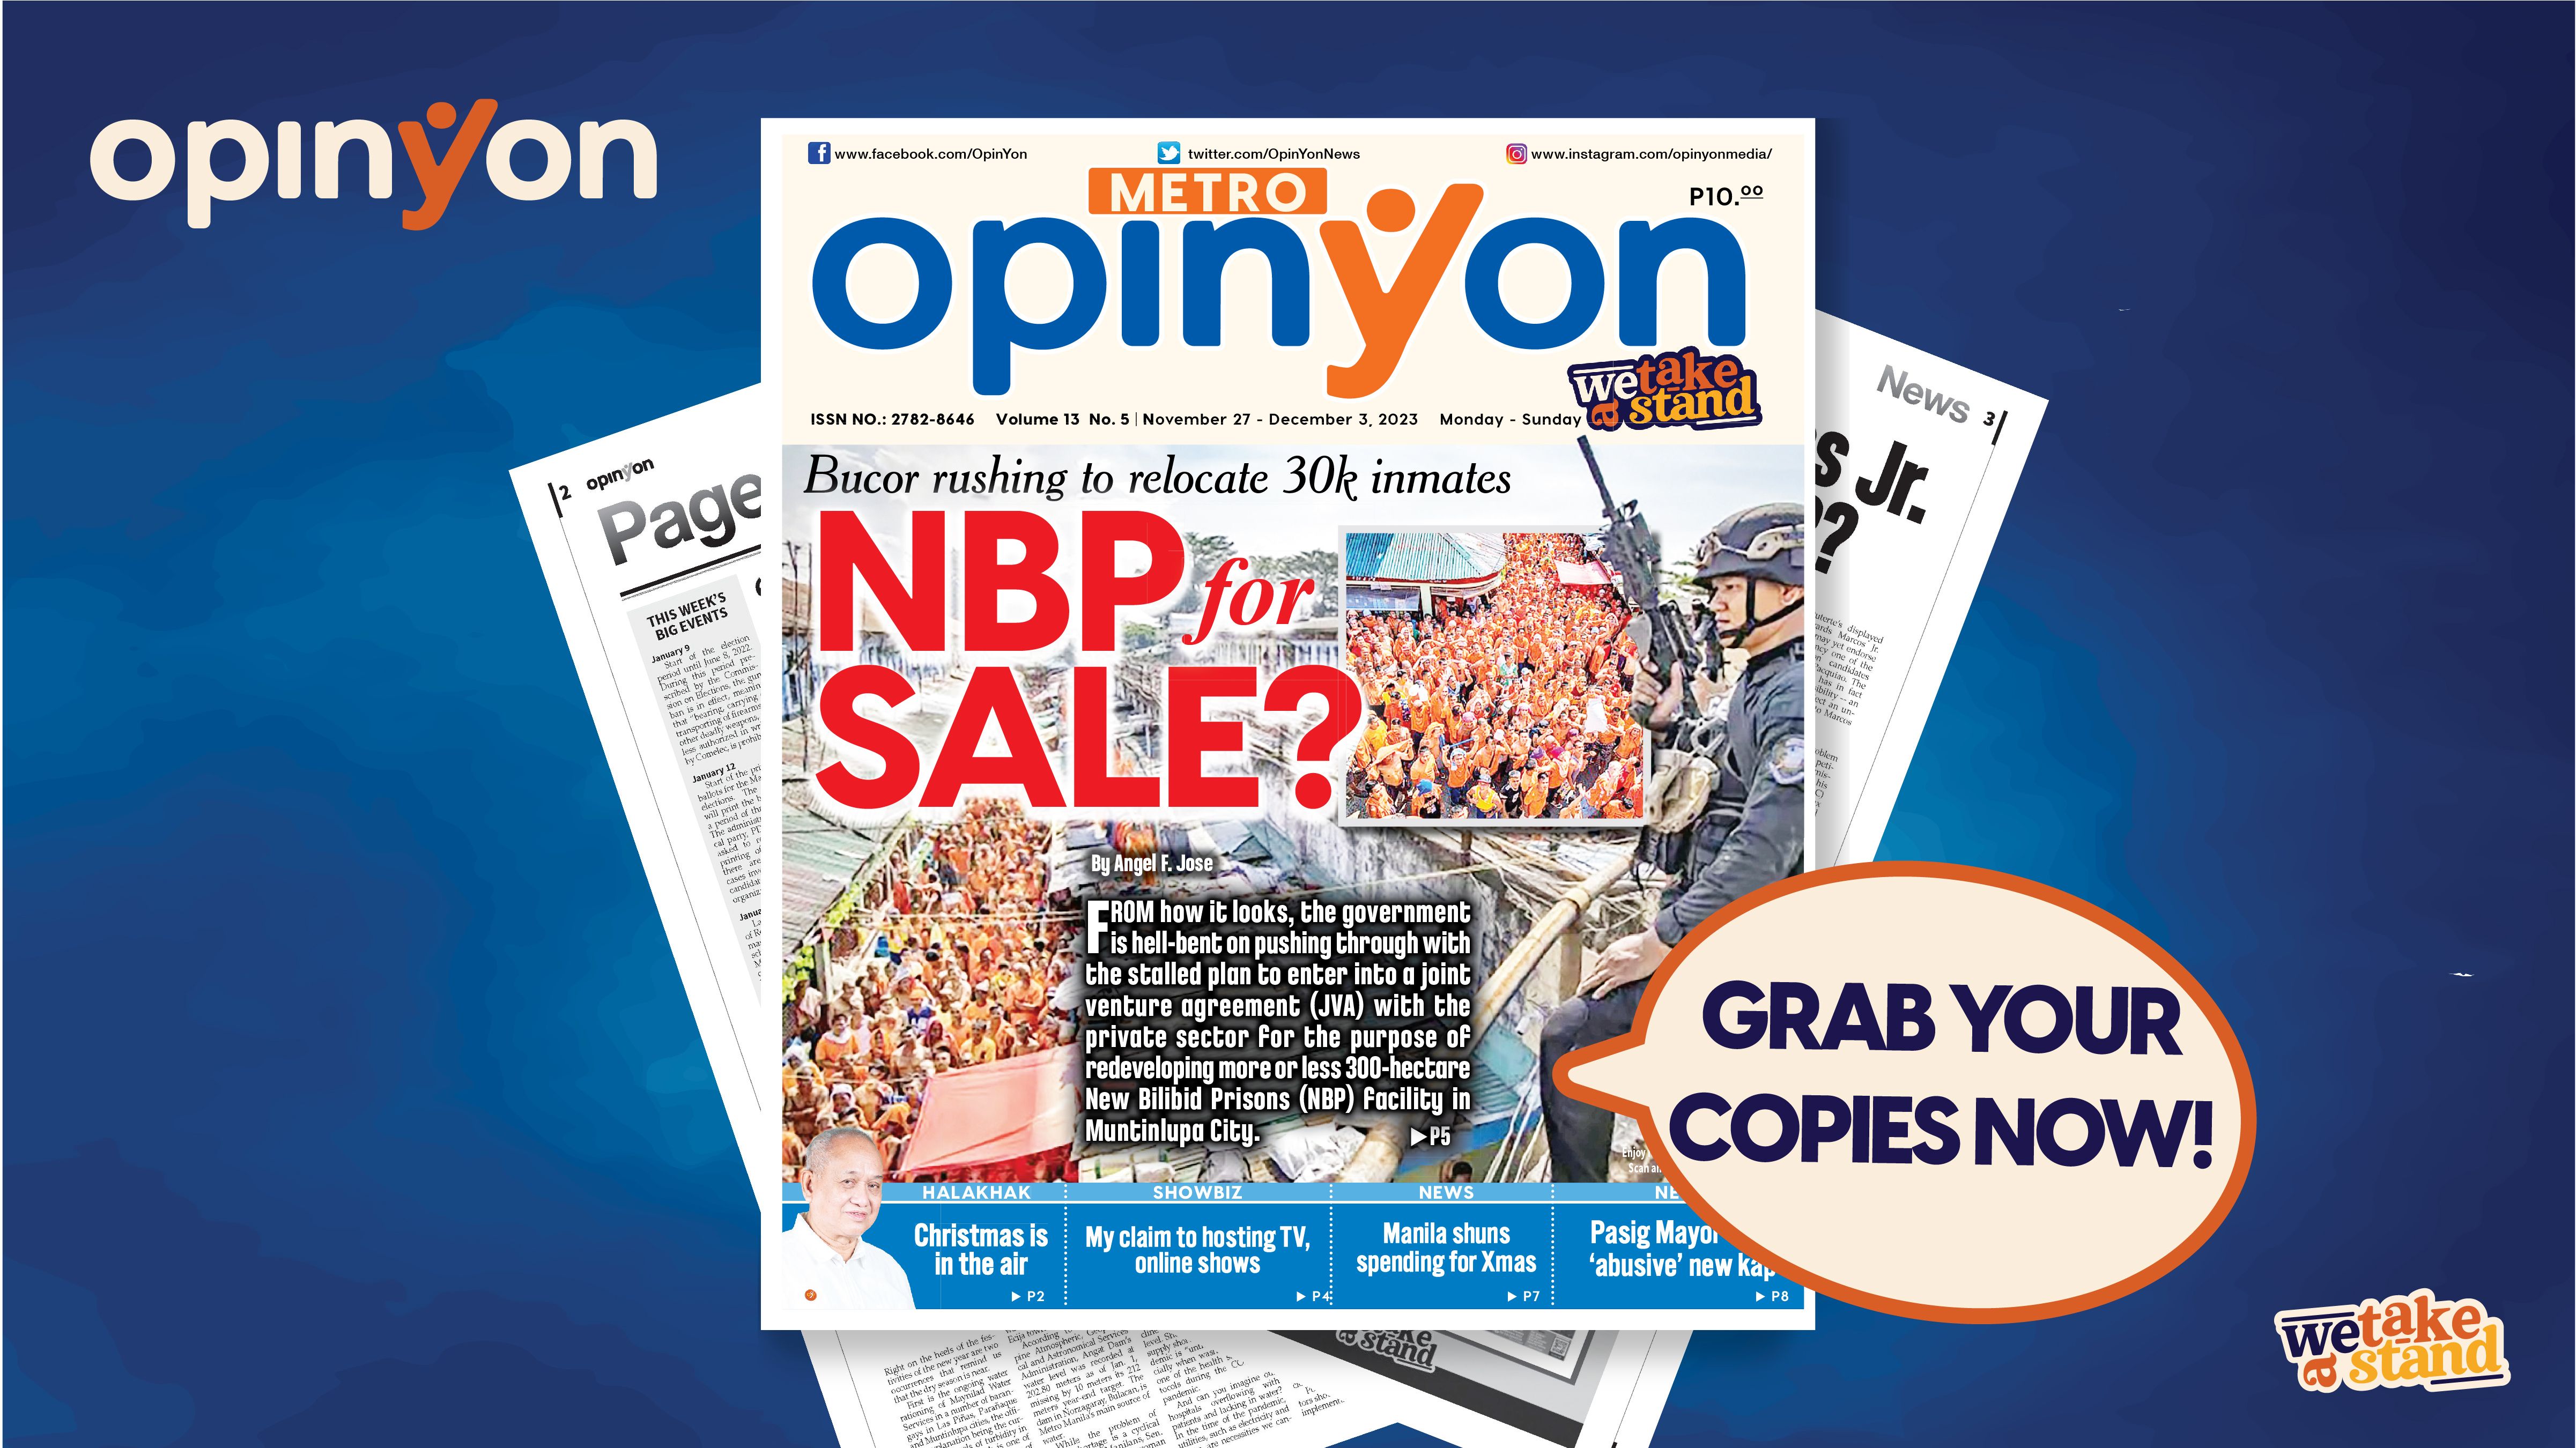 NBP FOR SALE?